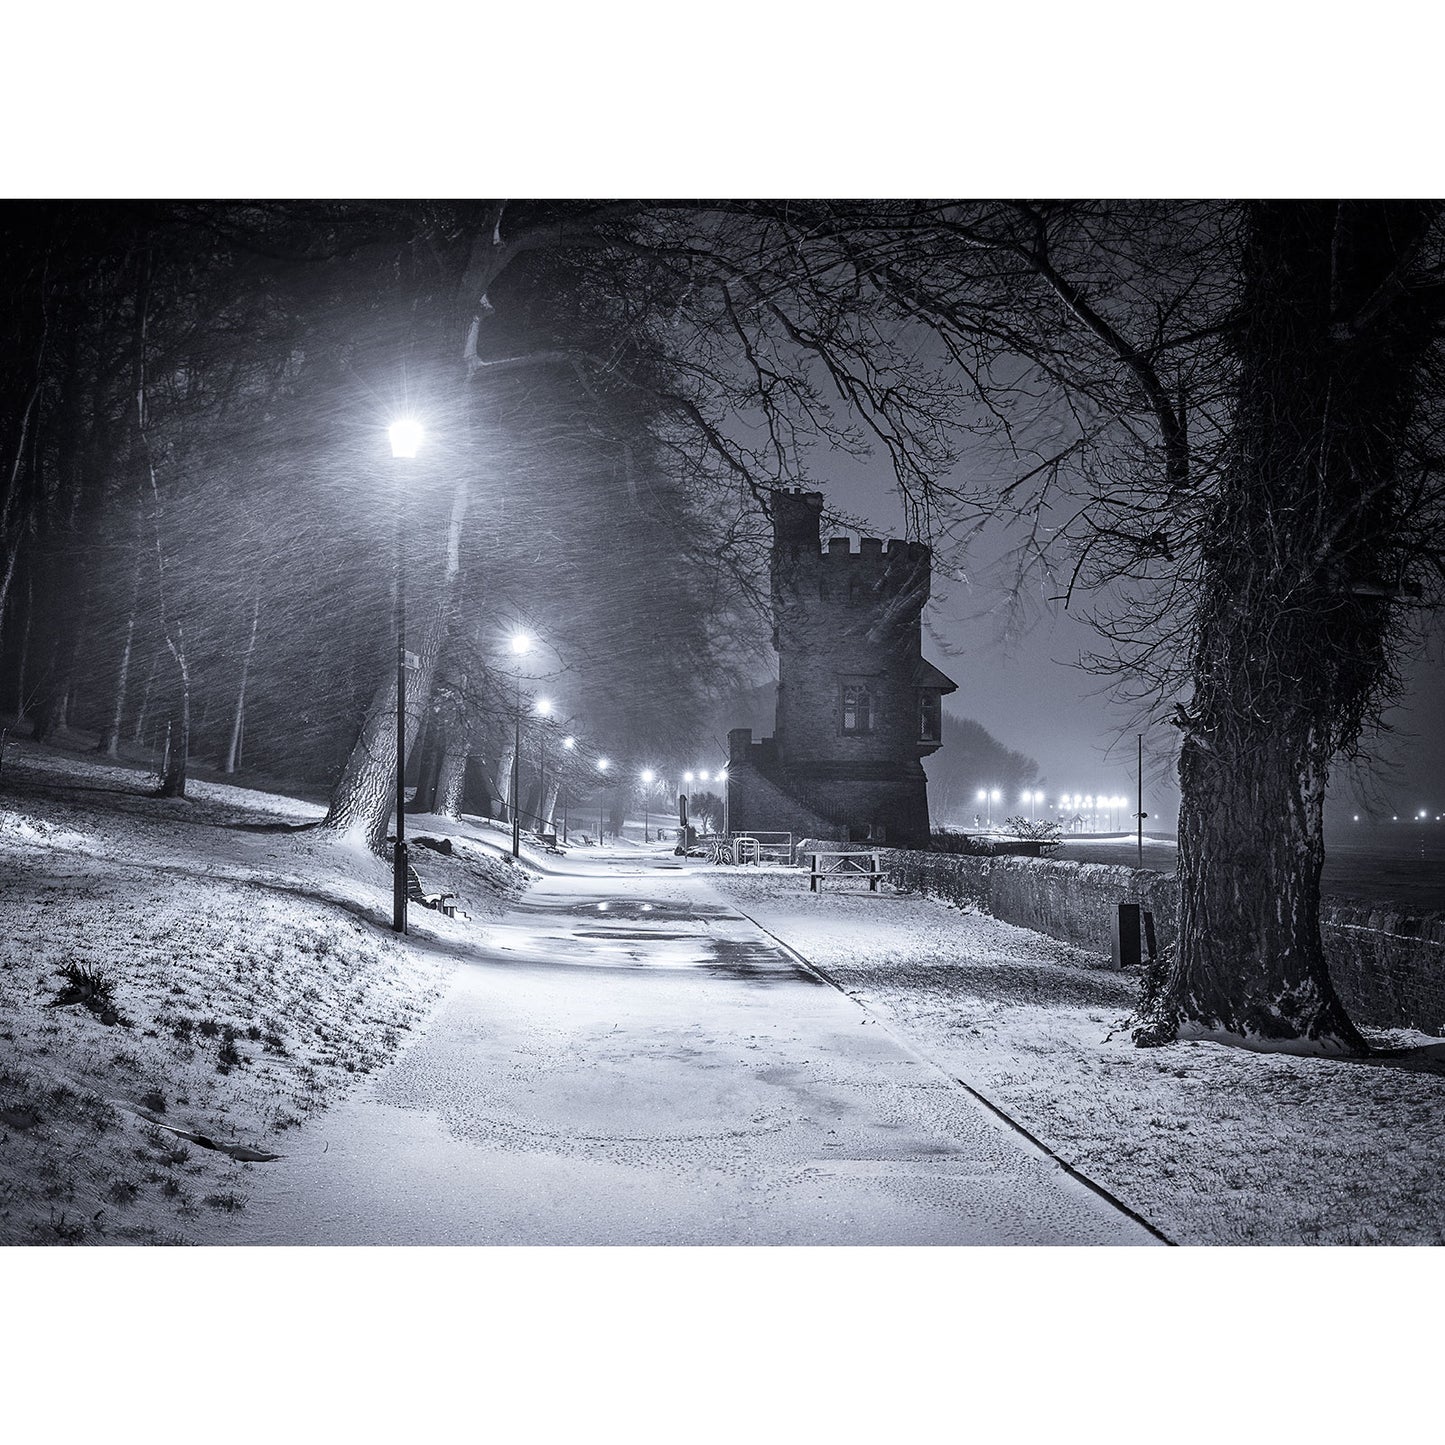 A snowy night scene with a lamp-lit pathway leading to an old tower on the Isle of Wight, flanked by bare trees and a glowing cityscape in the distance captured by Winter's Night, Appley Tower from Available Light Photography.